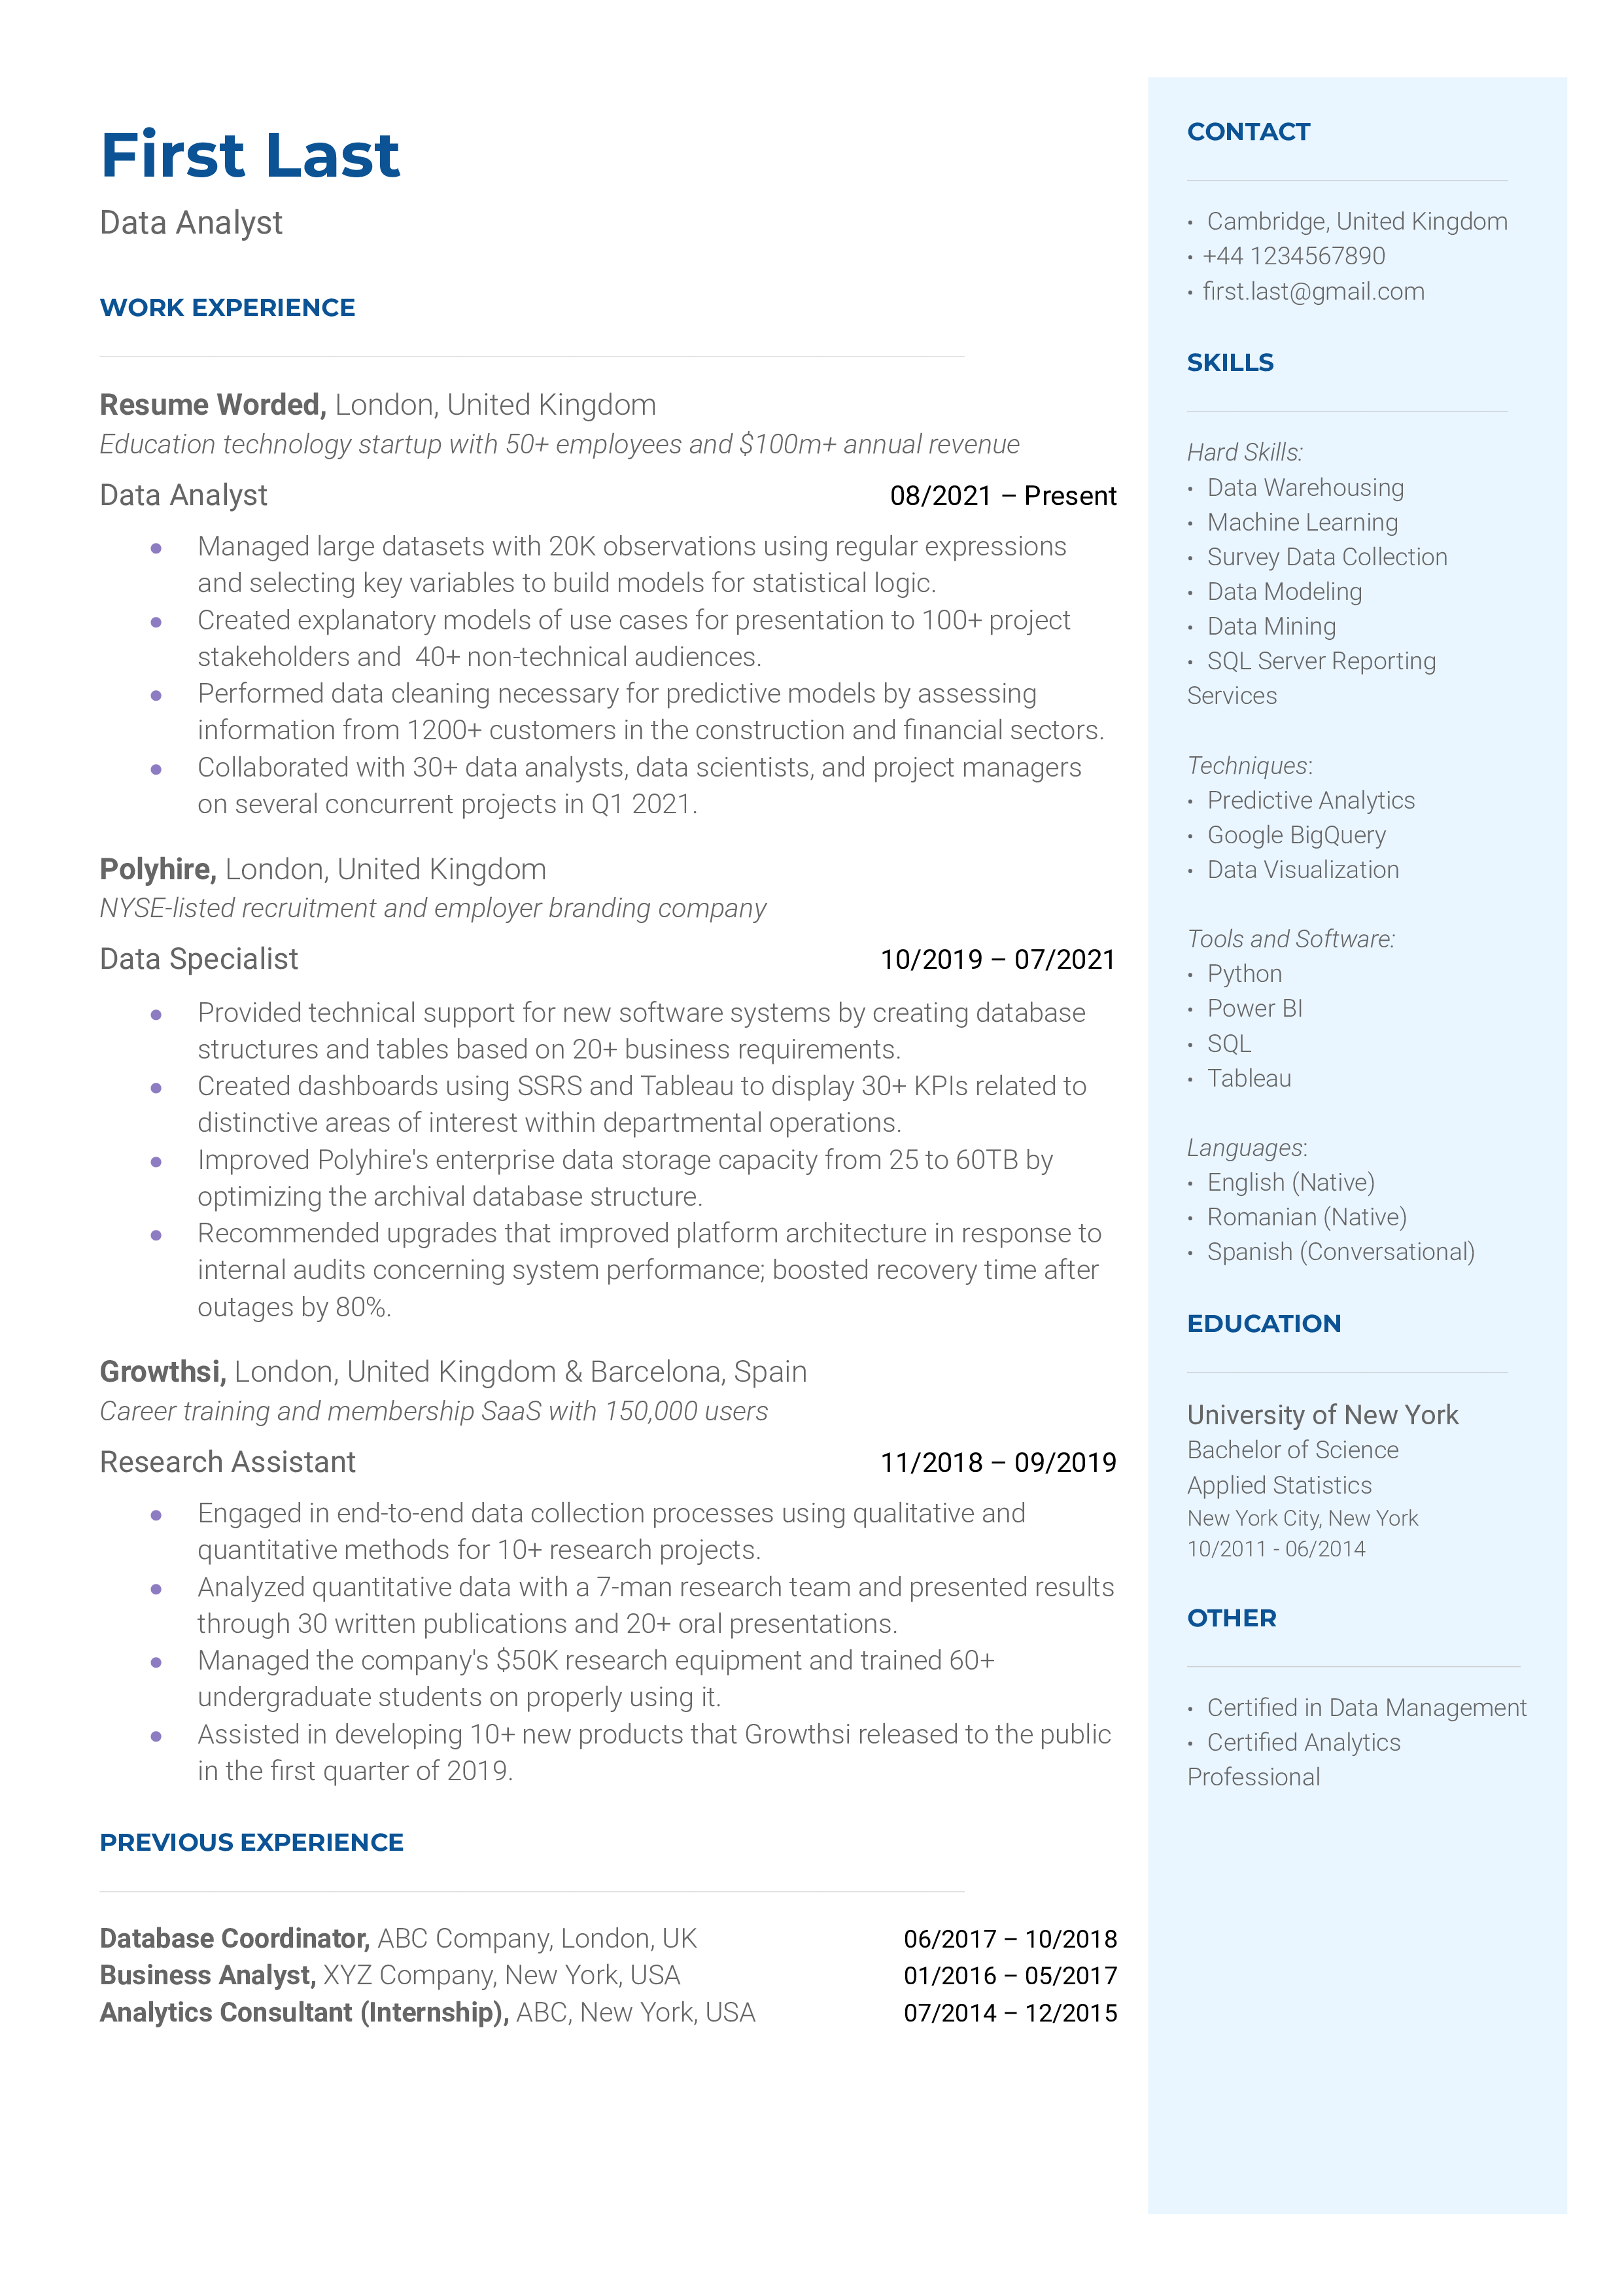 A professional CV of a Data Analyst demonstrating technical skills and business understanding.